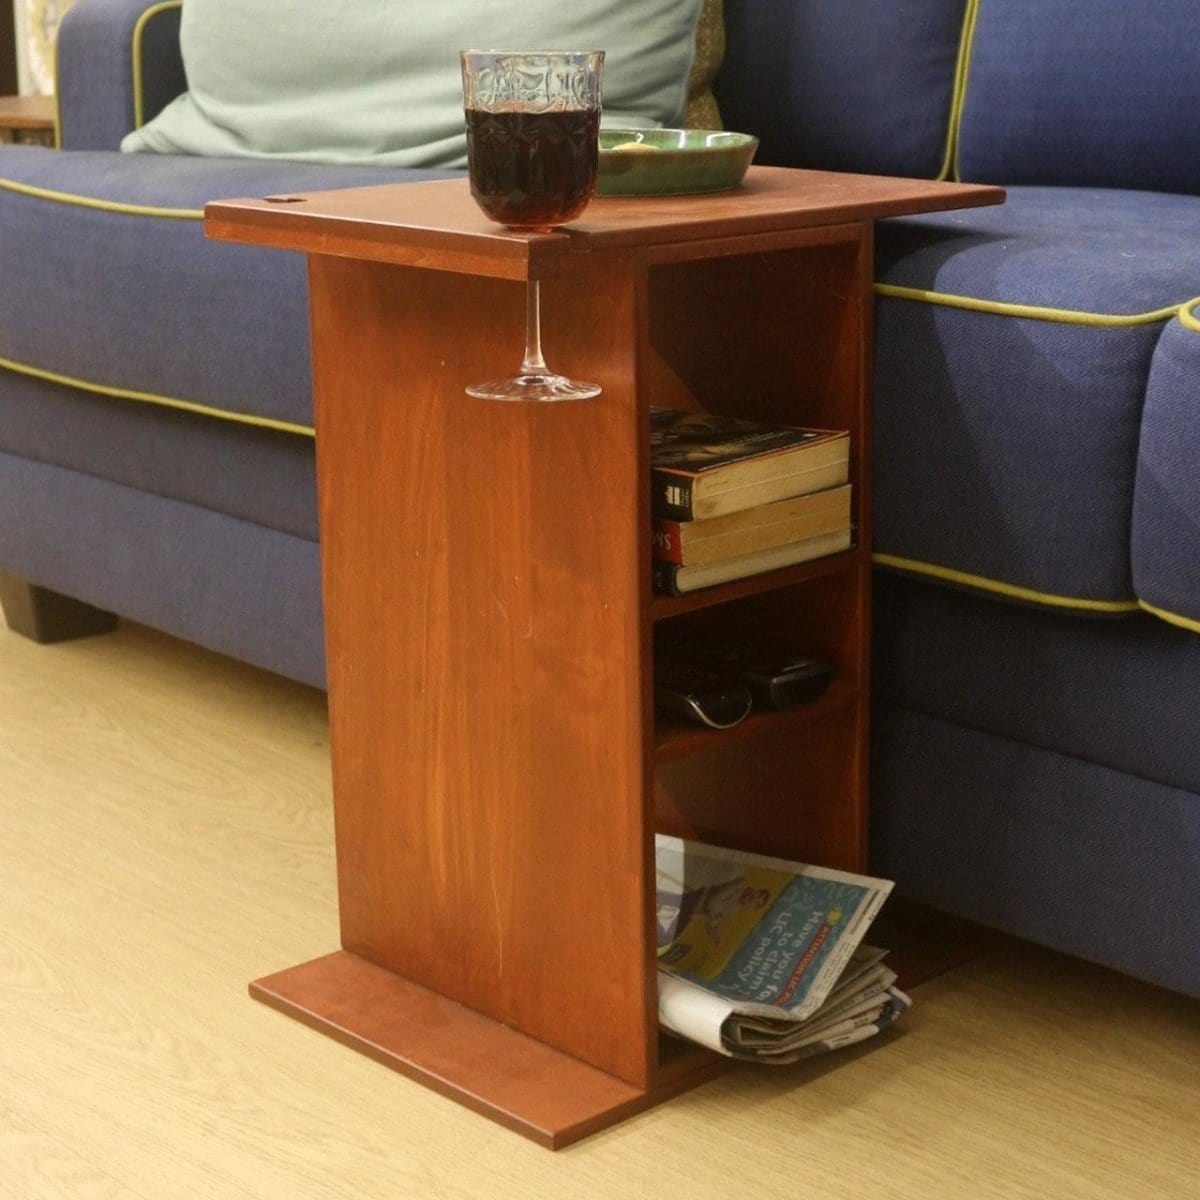 Barish Sofa Table Centre Stand (With Space for your Wine Glass) Firewood BH0003FW Best Home Decor Handcrafted